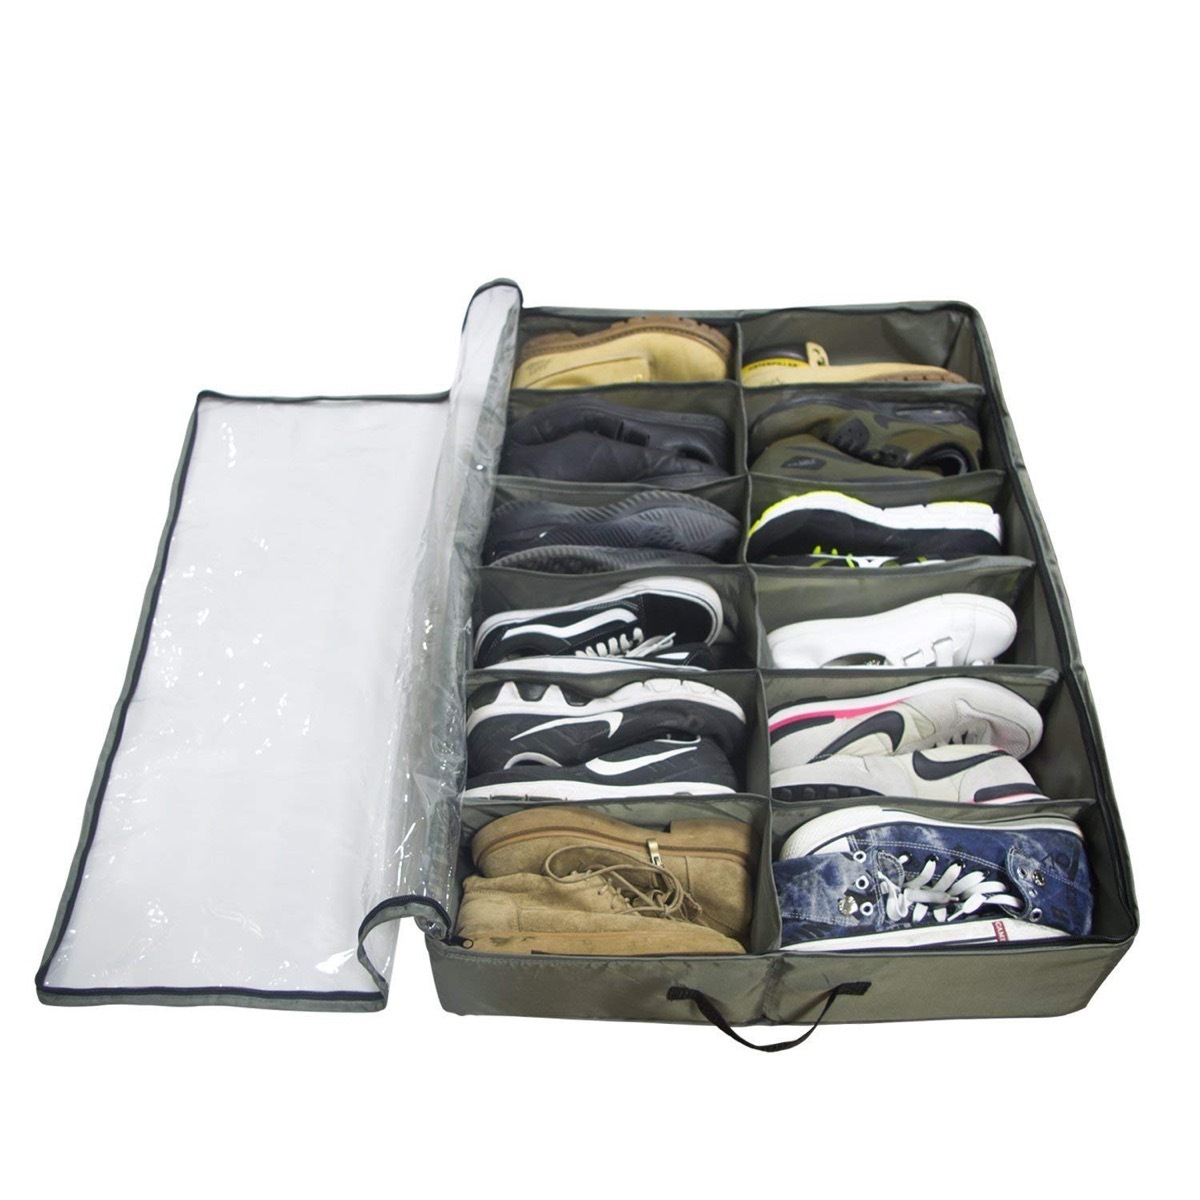 Under-the-bed shoe storage bin {organizational products on Amazon}